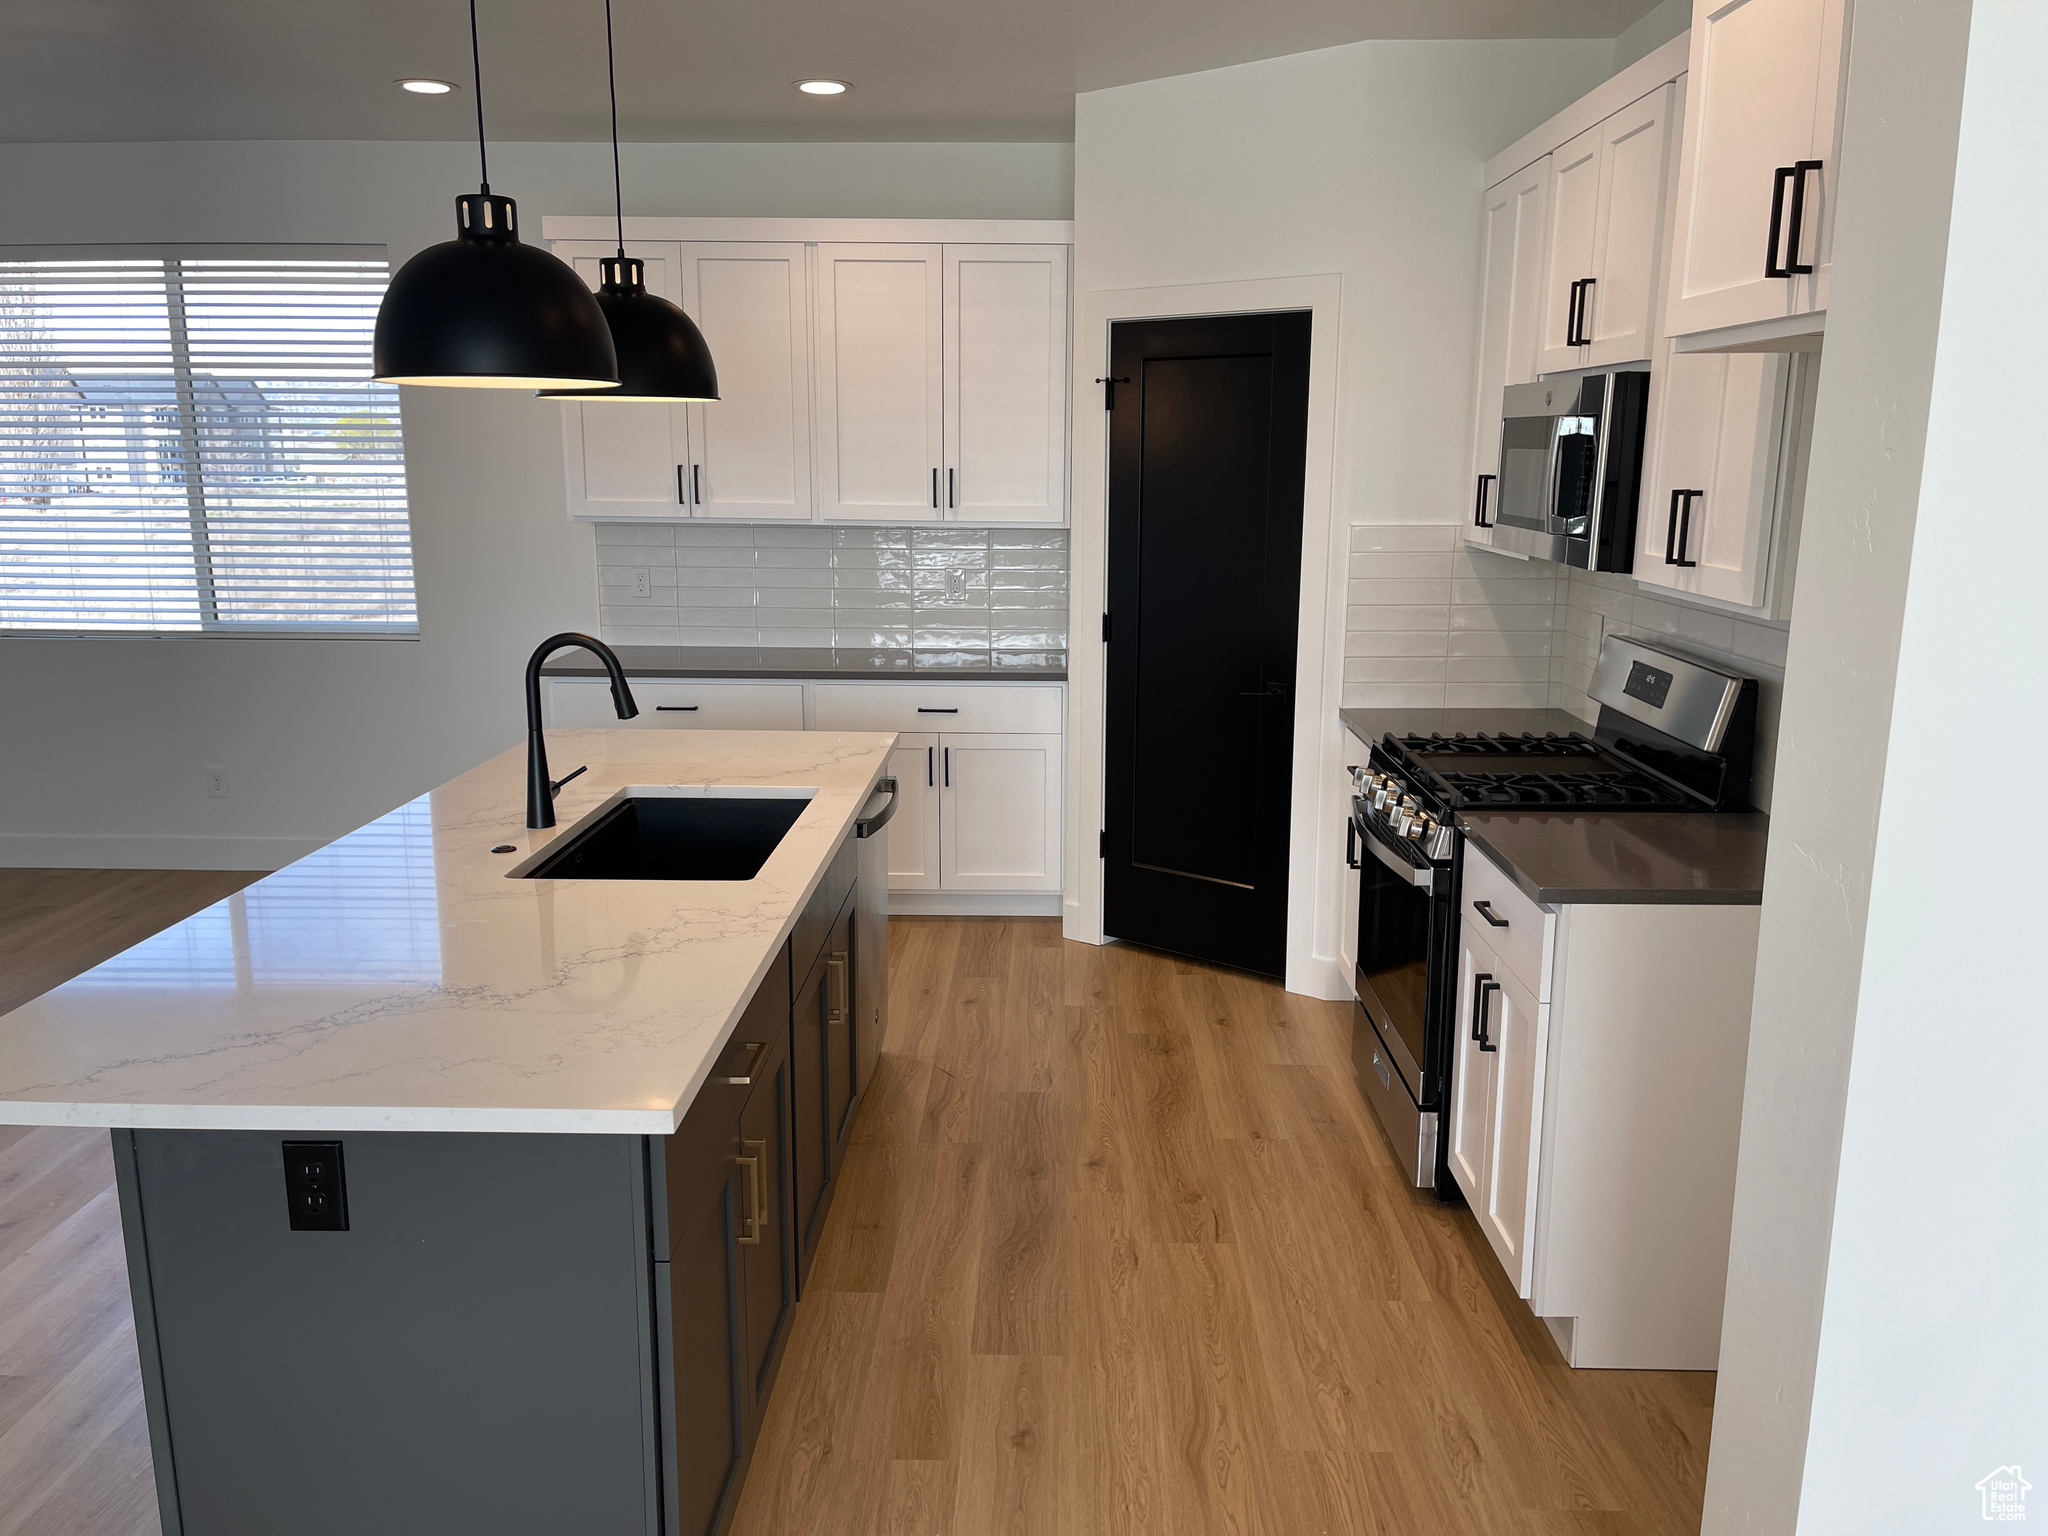 Kitchen featuring sink, white cabinets, a center island with sink, stainless steel appliances, and decorative light fixtures